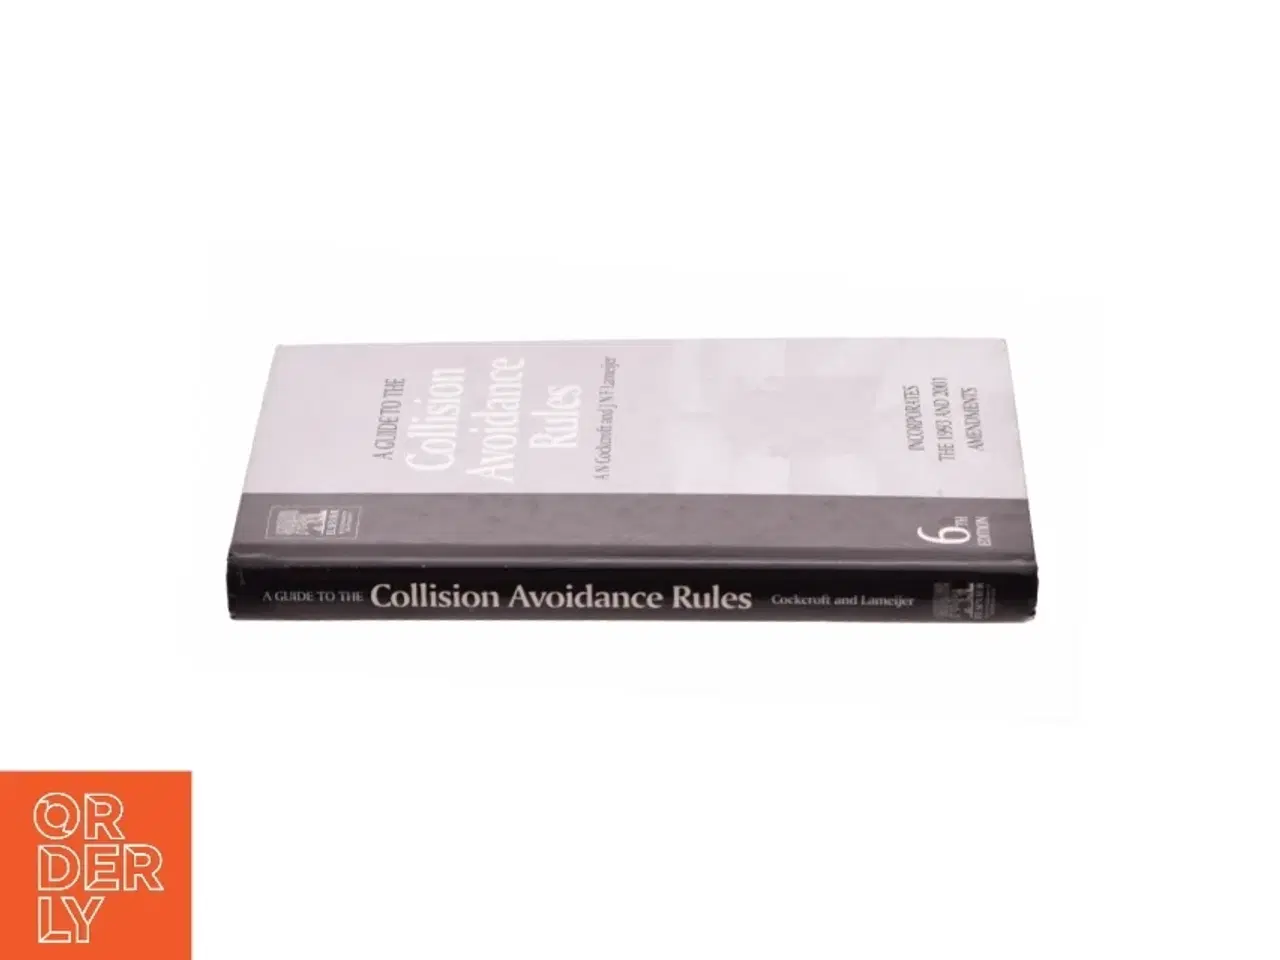 Billede 2 - Guide to the Collision Avoidance Rules af A. N. Cockcroft (Bog)